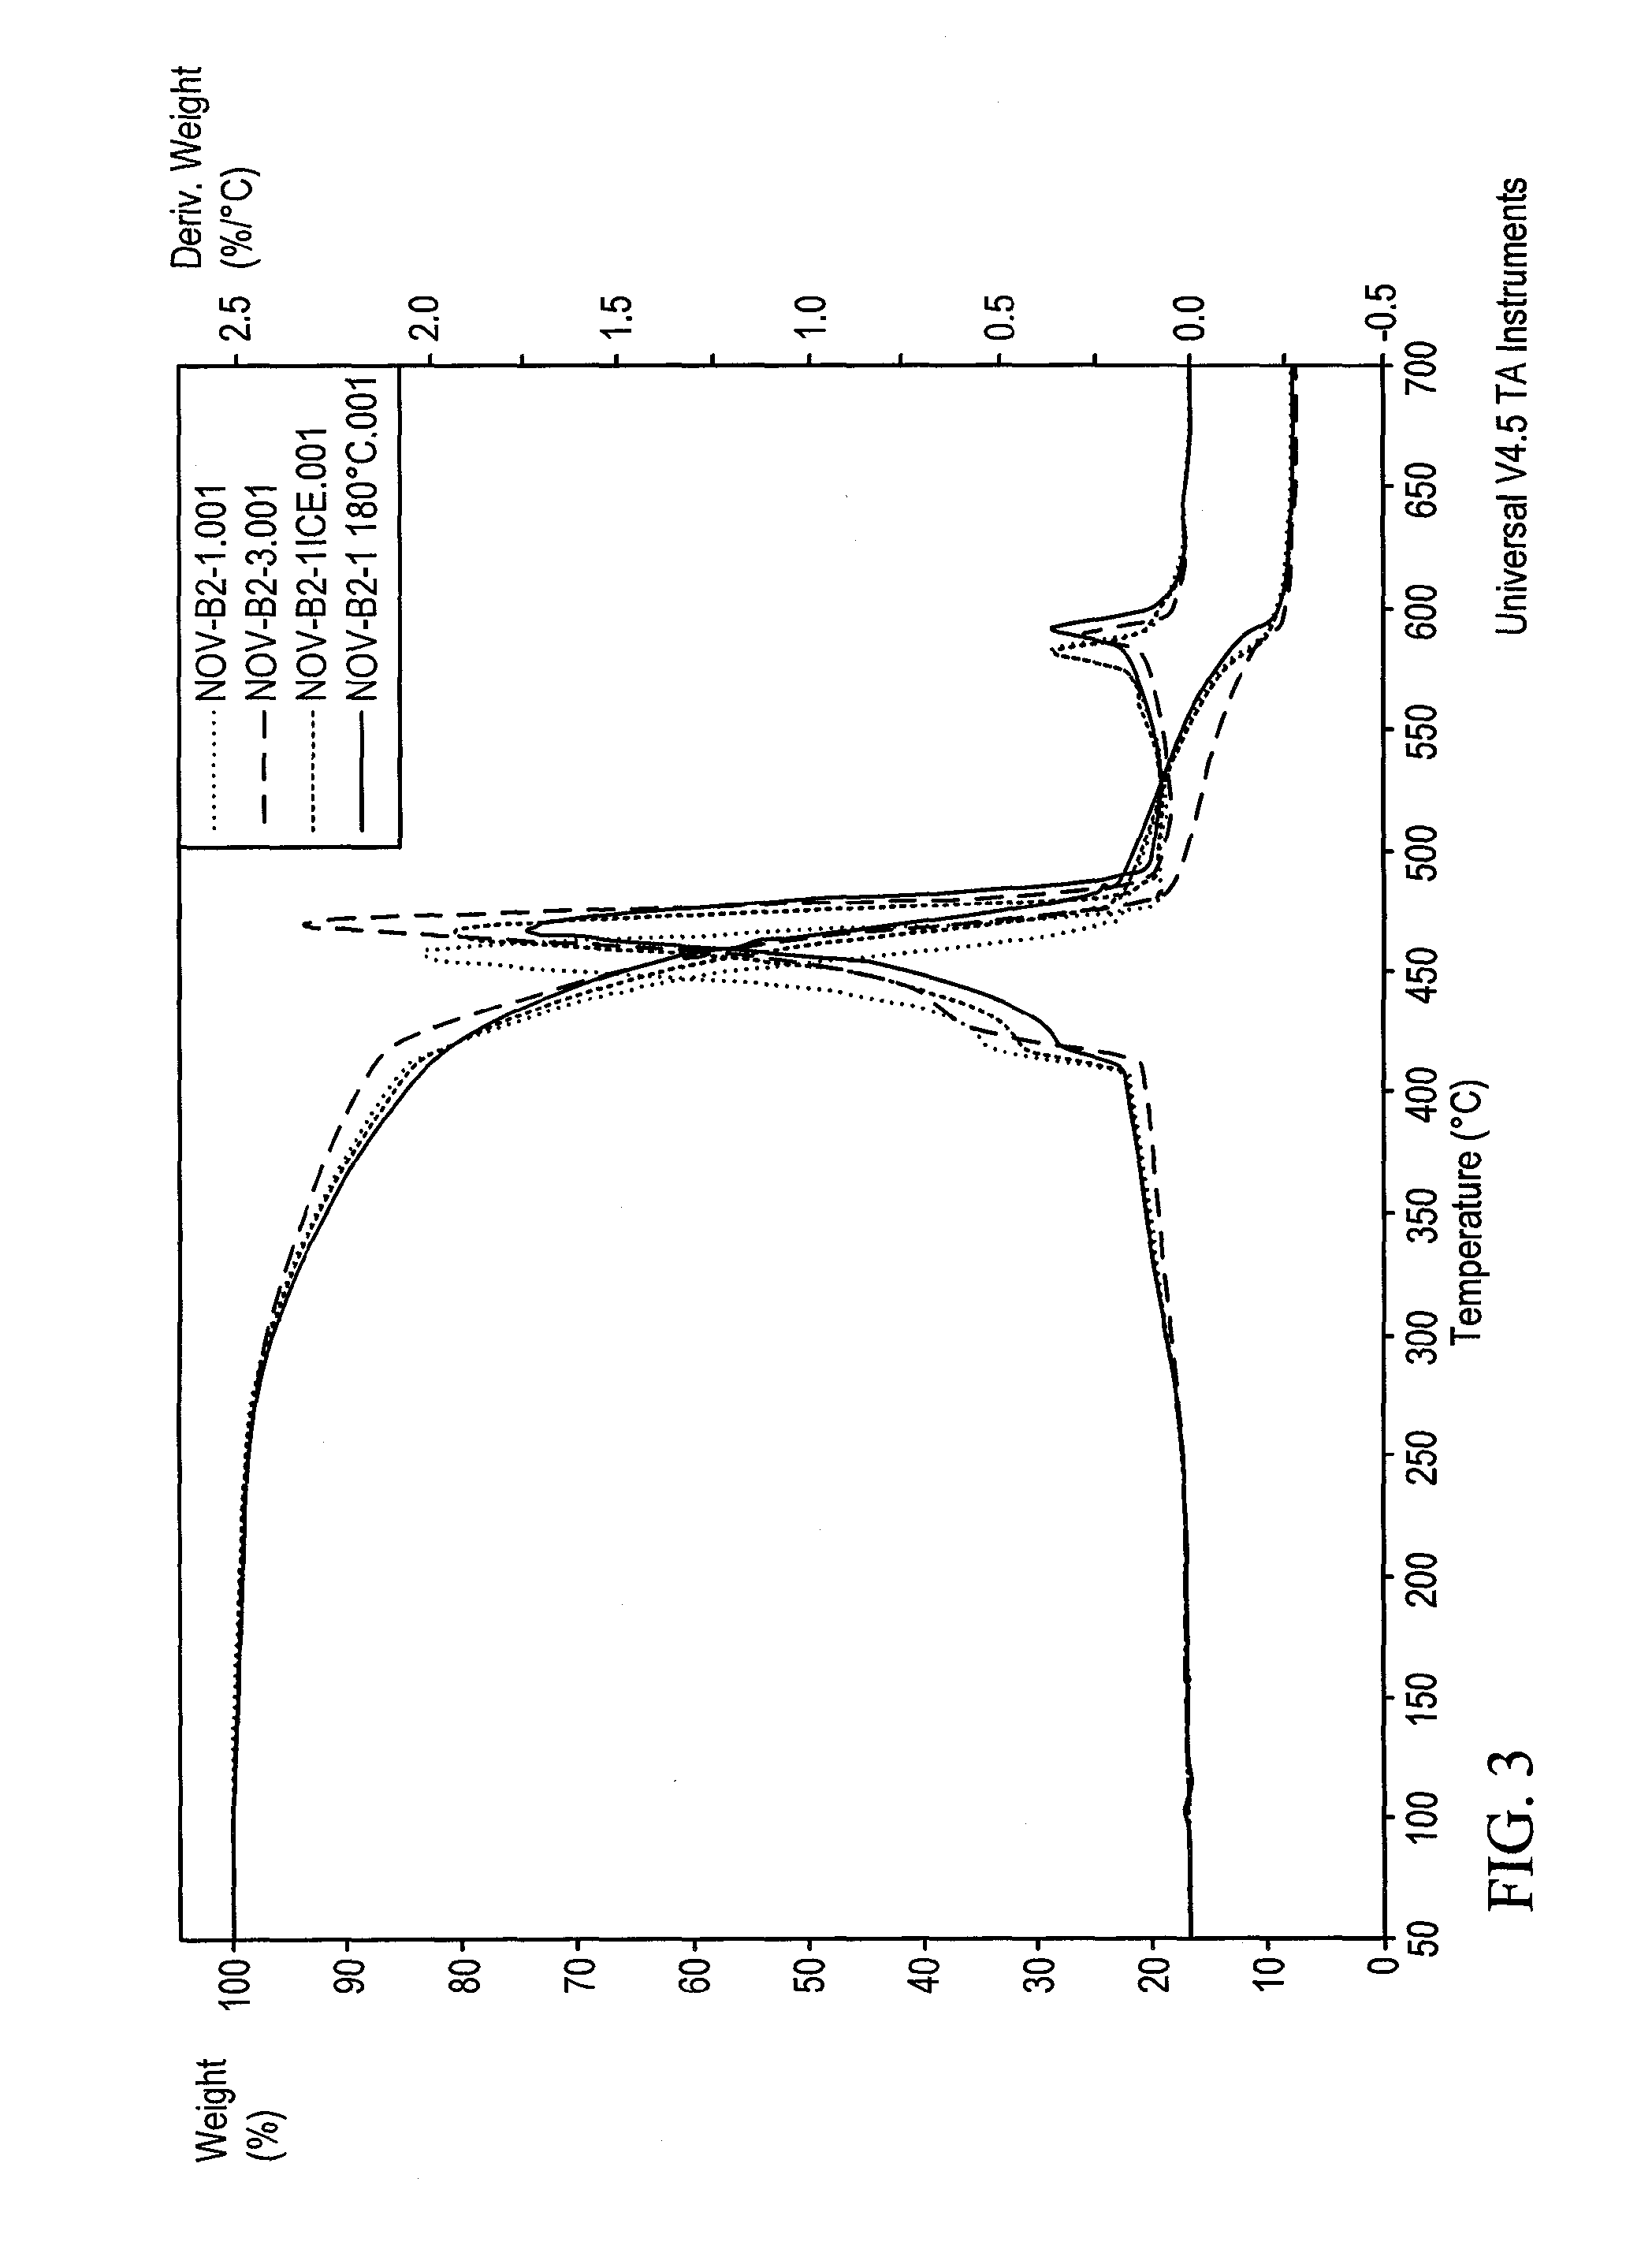 Elastomer and/or composite based material for thermal energy storage